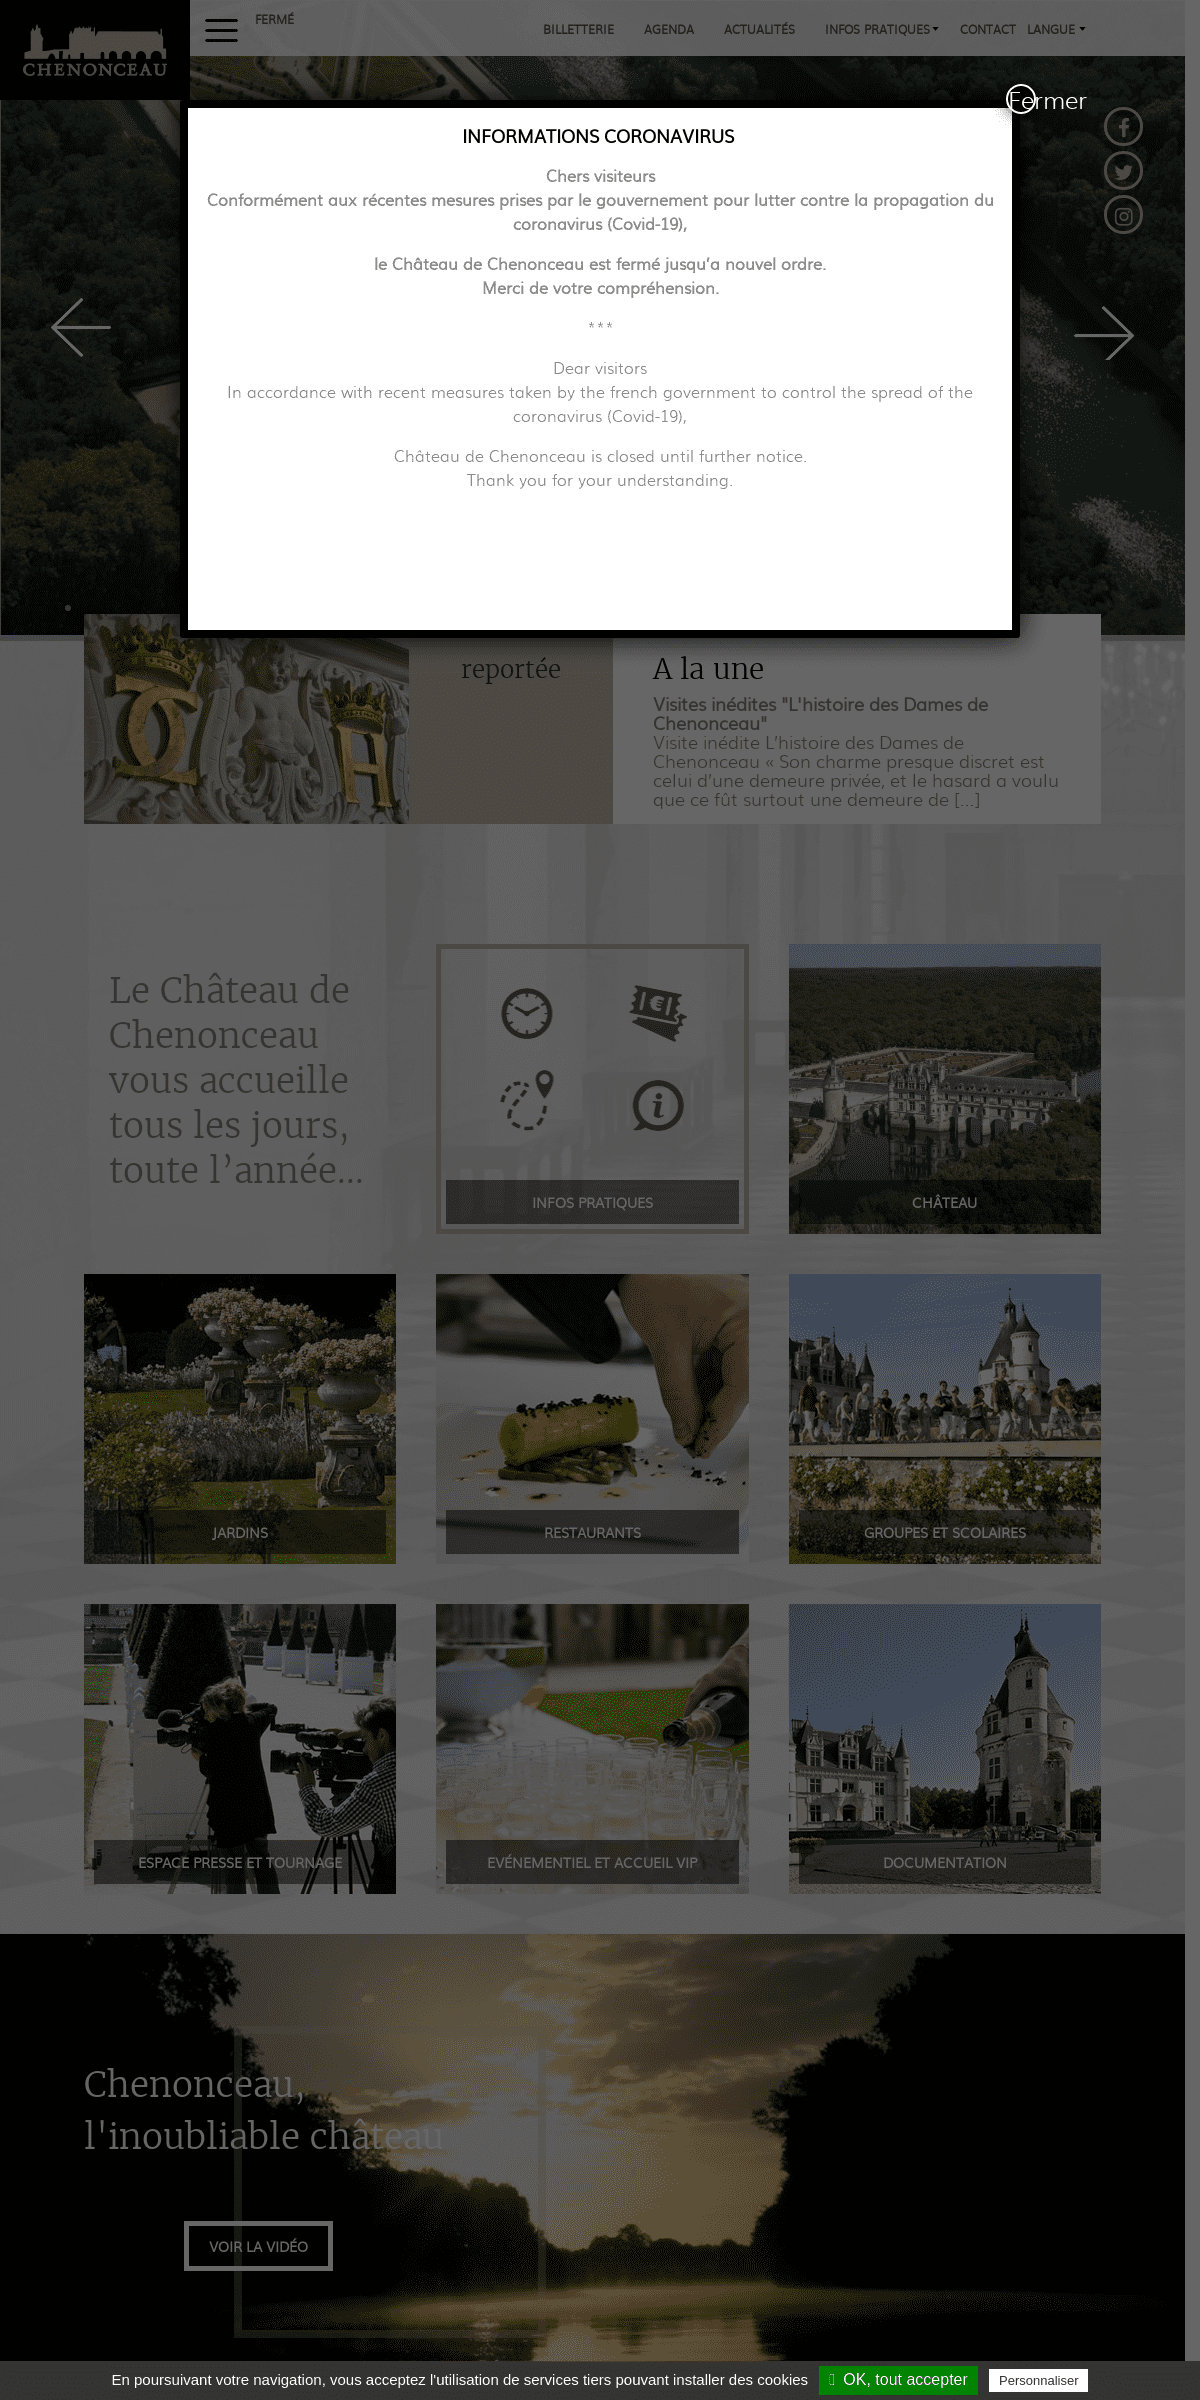 A complete backup of chenonceau.com